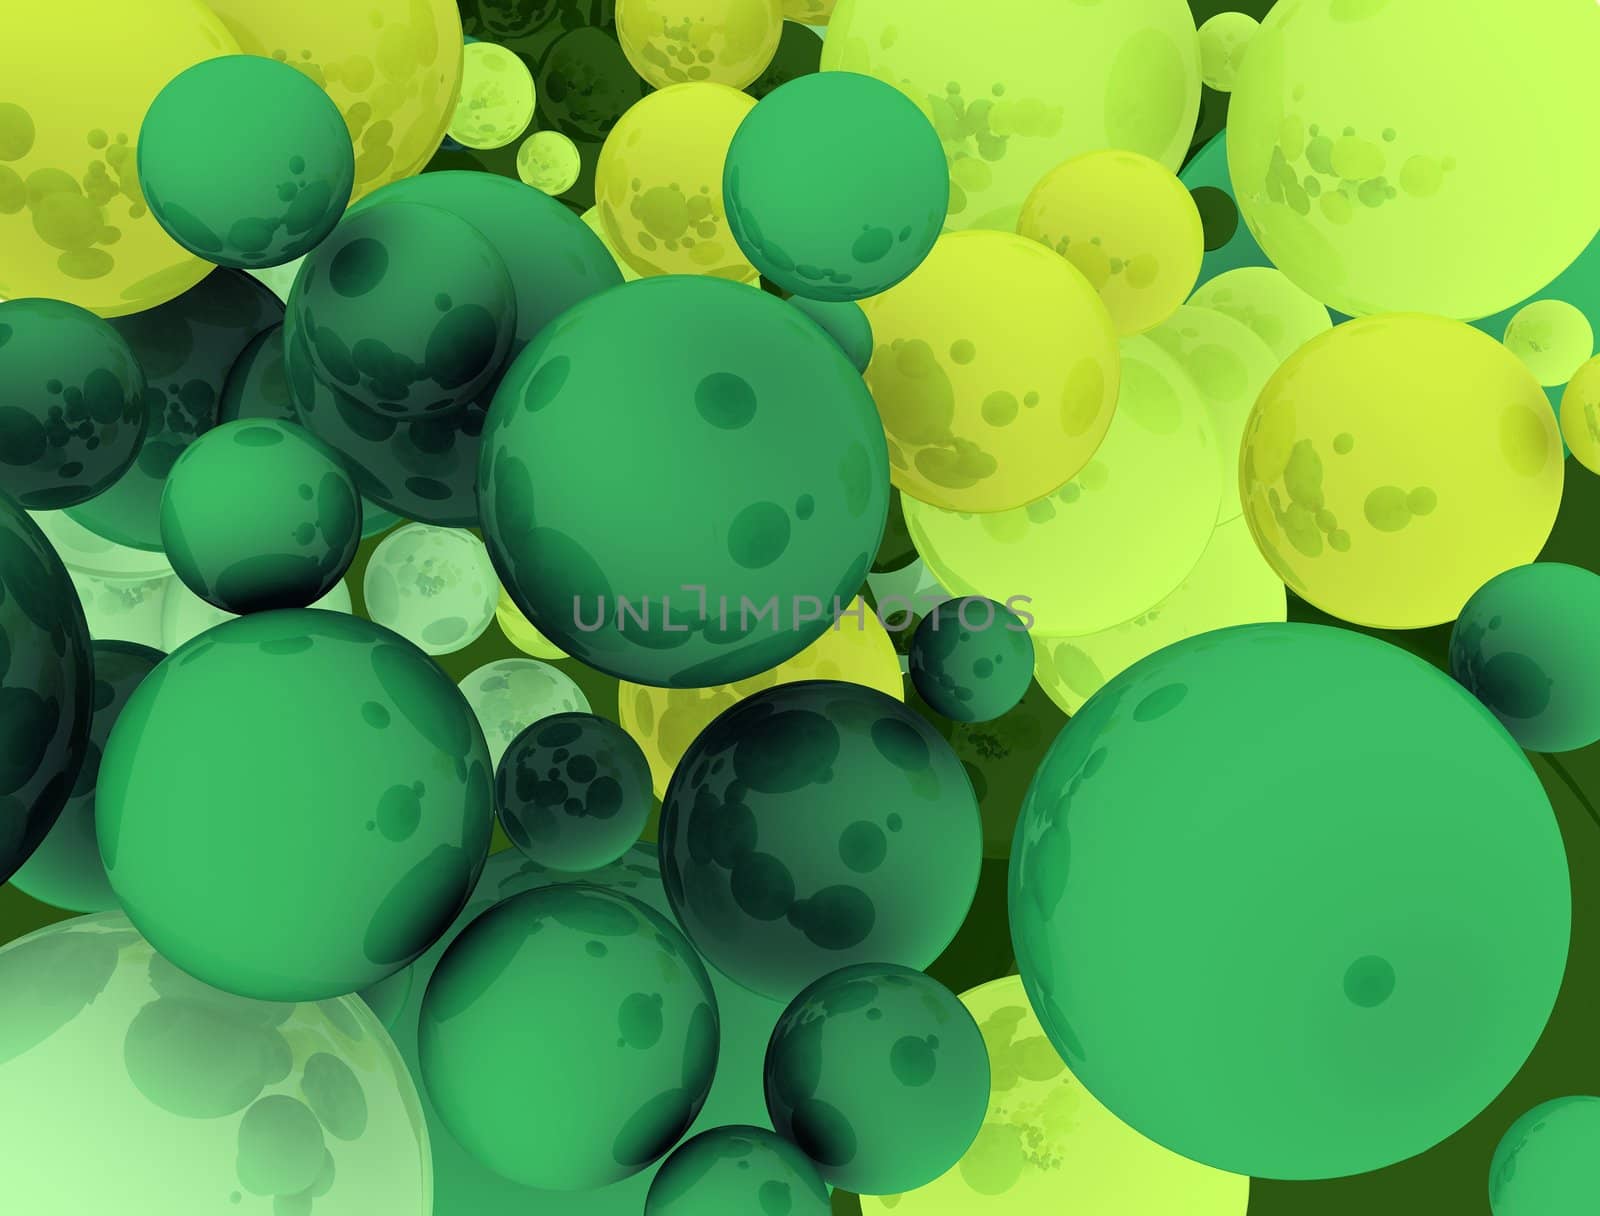 Conceptual abstract background consisting of spheres fulfilling whole area of view. Concept is rendered with slight reflections and spheres are portrayed in various sizes, with yellow and green  color variations.